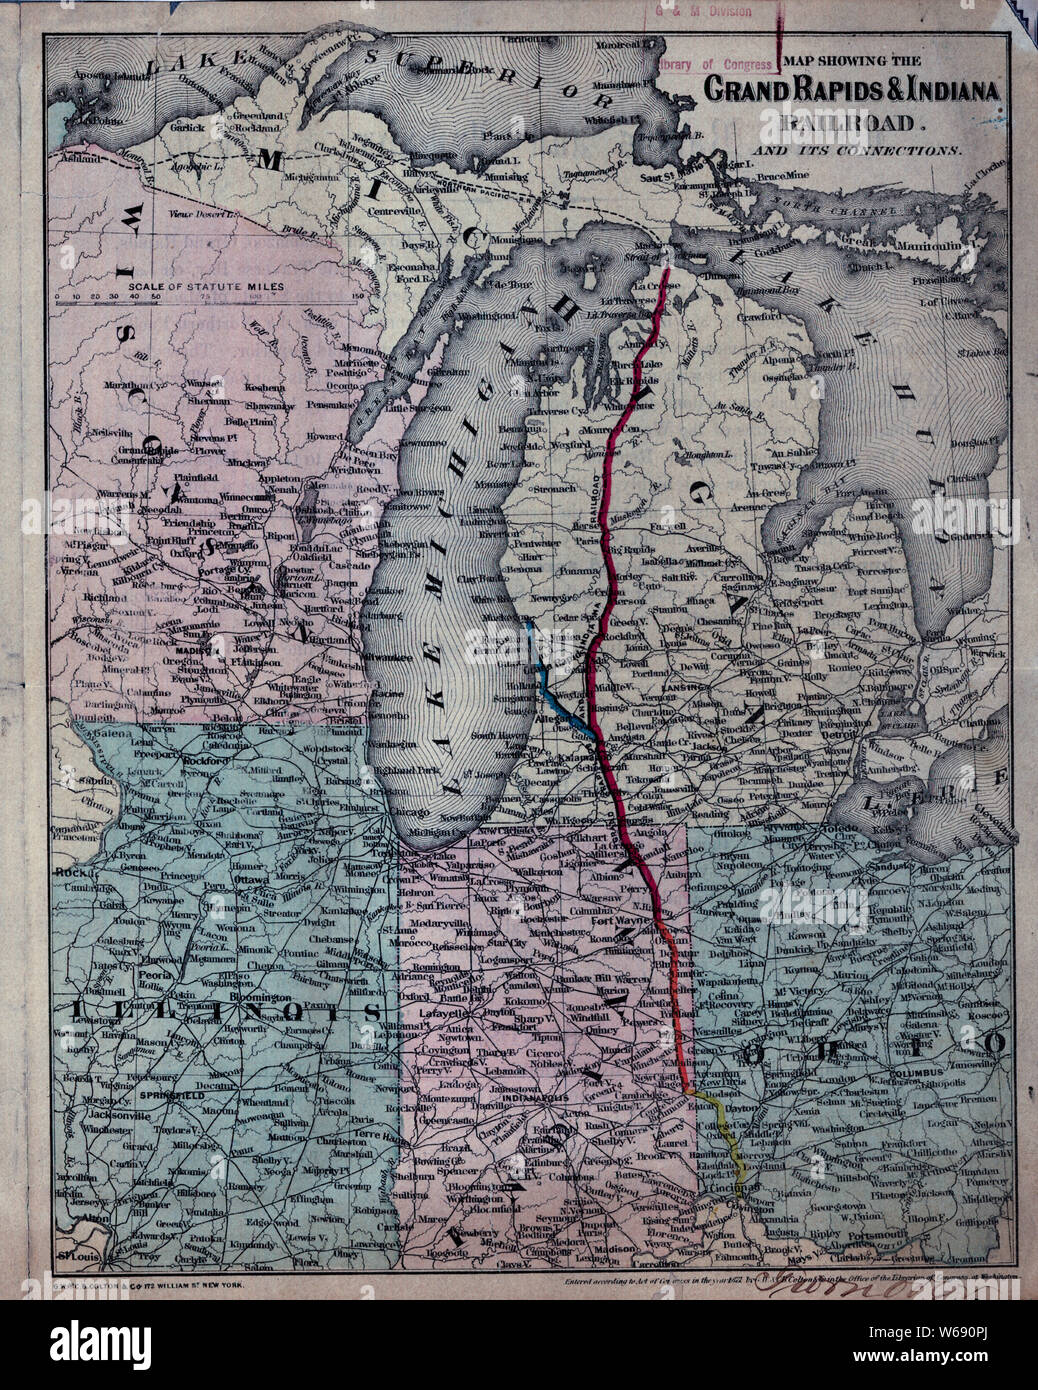 0270 Railroad Maps Map showing the Grand Rapids Indiana Railroad and its connections Rebuild and Repair Stock Photo